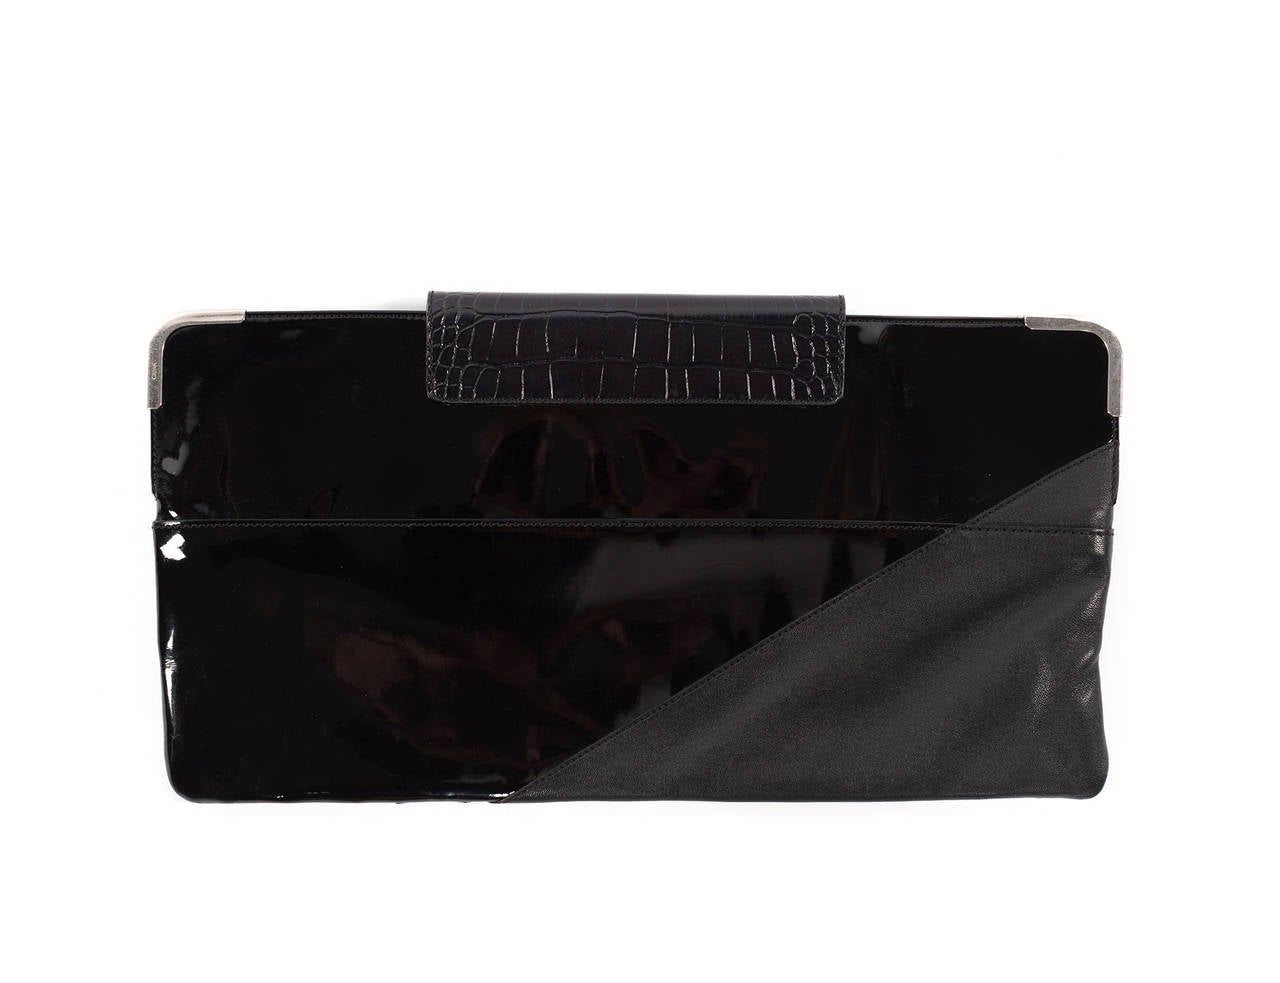 Black Chloe by Claire Waight Keller clutch with snakeskin accents from 2013 For Sale